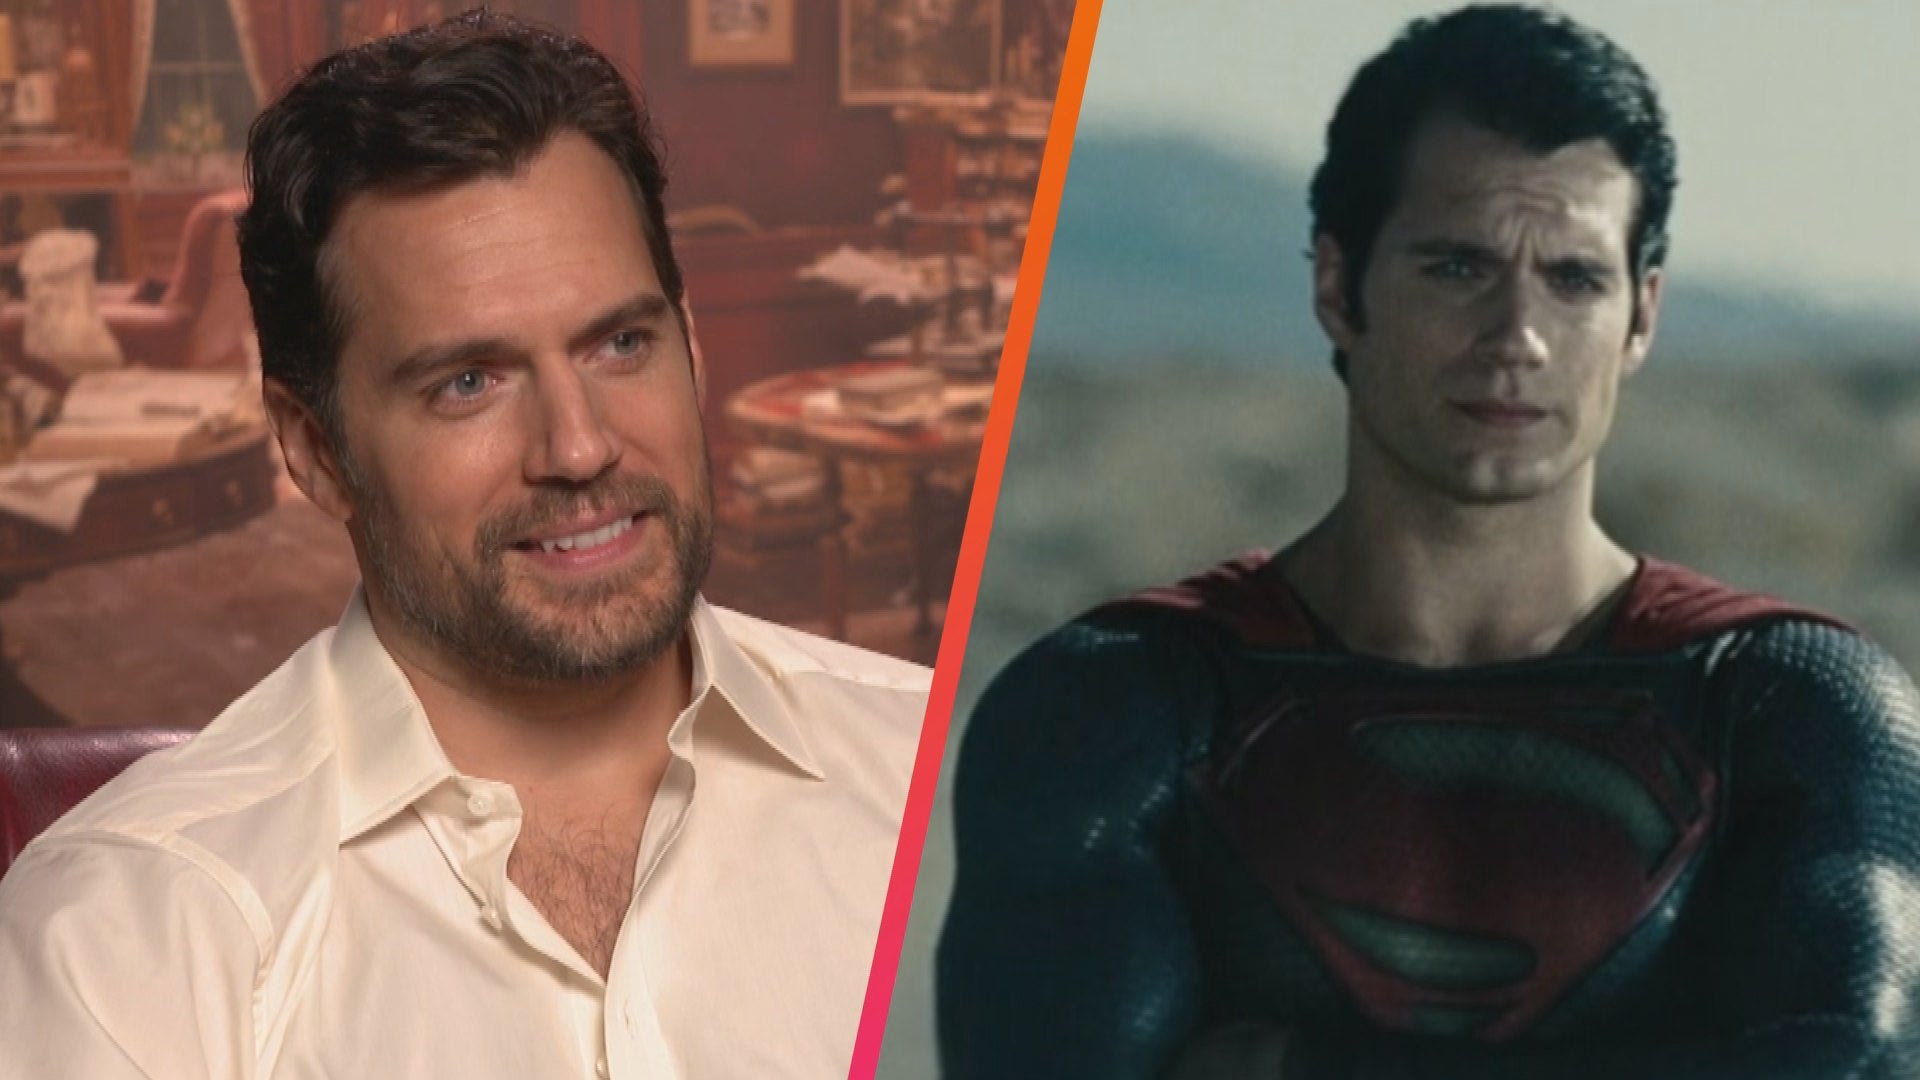 Who Will Play Superman? Henry Cavill Will No Longer Star in Role